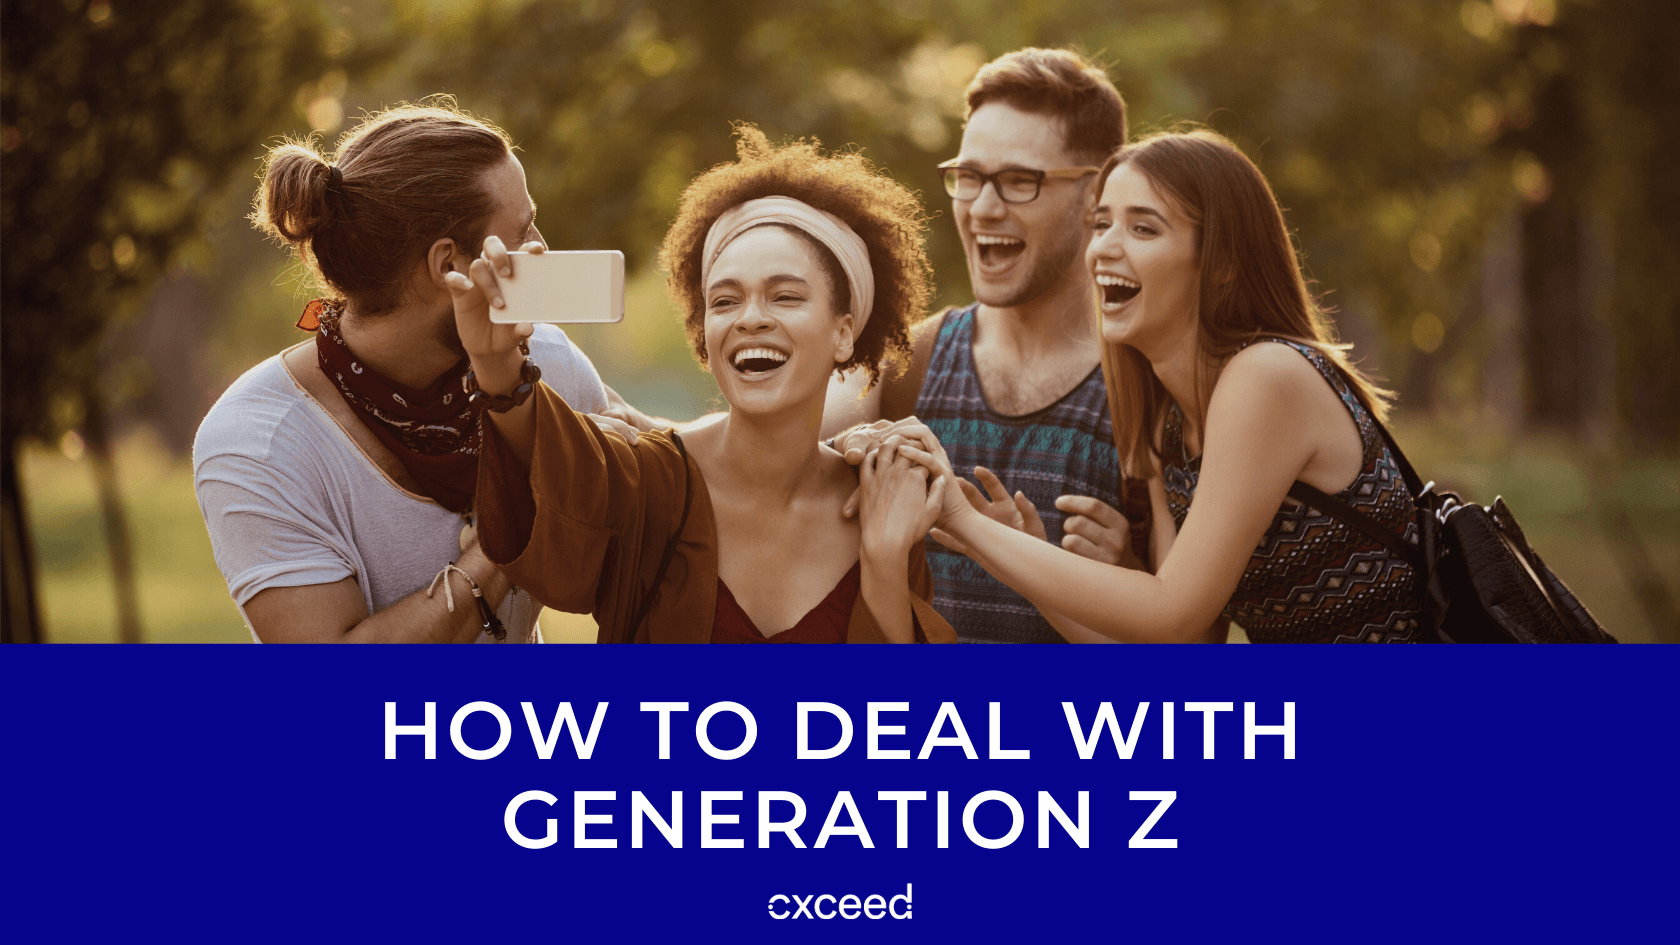 How To Deal With Generation Z - Cxceed